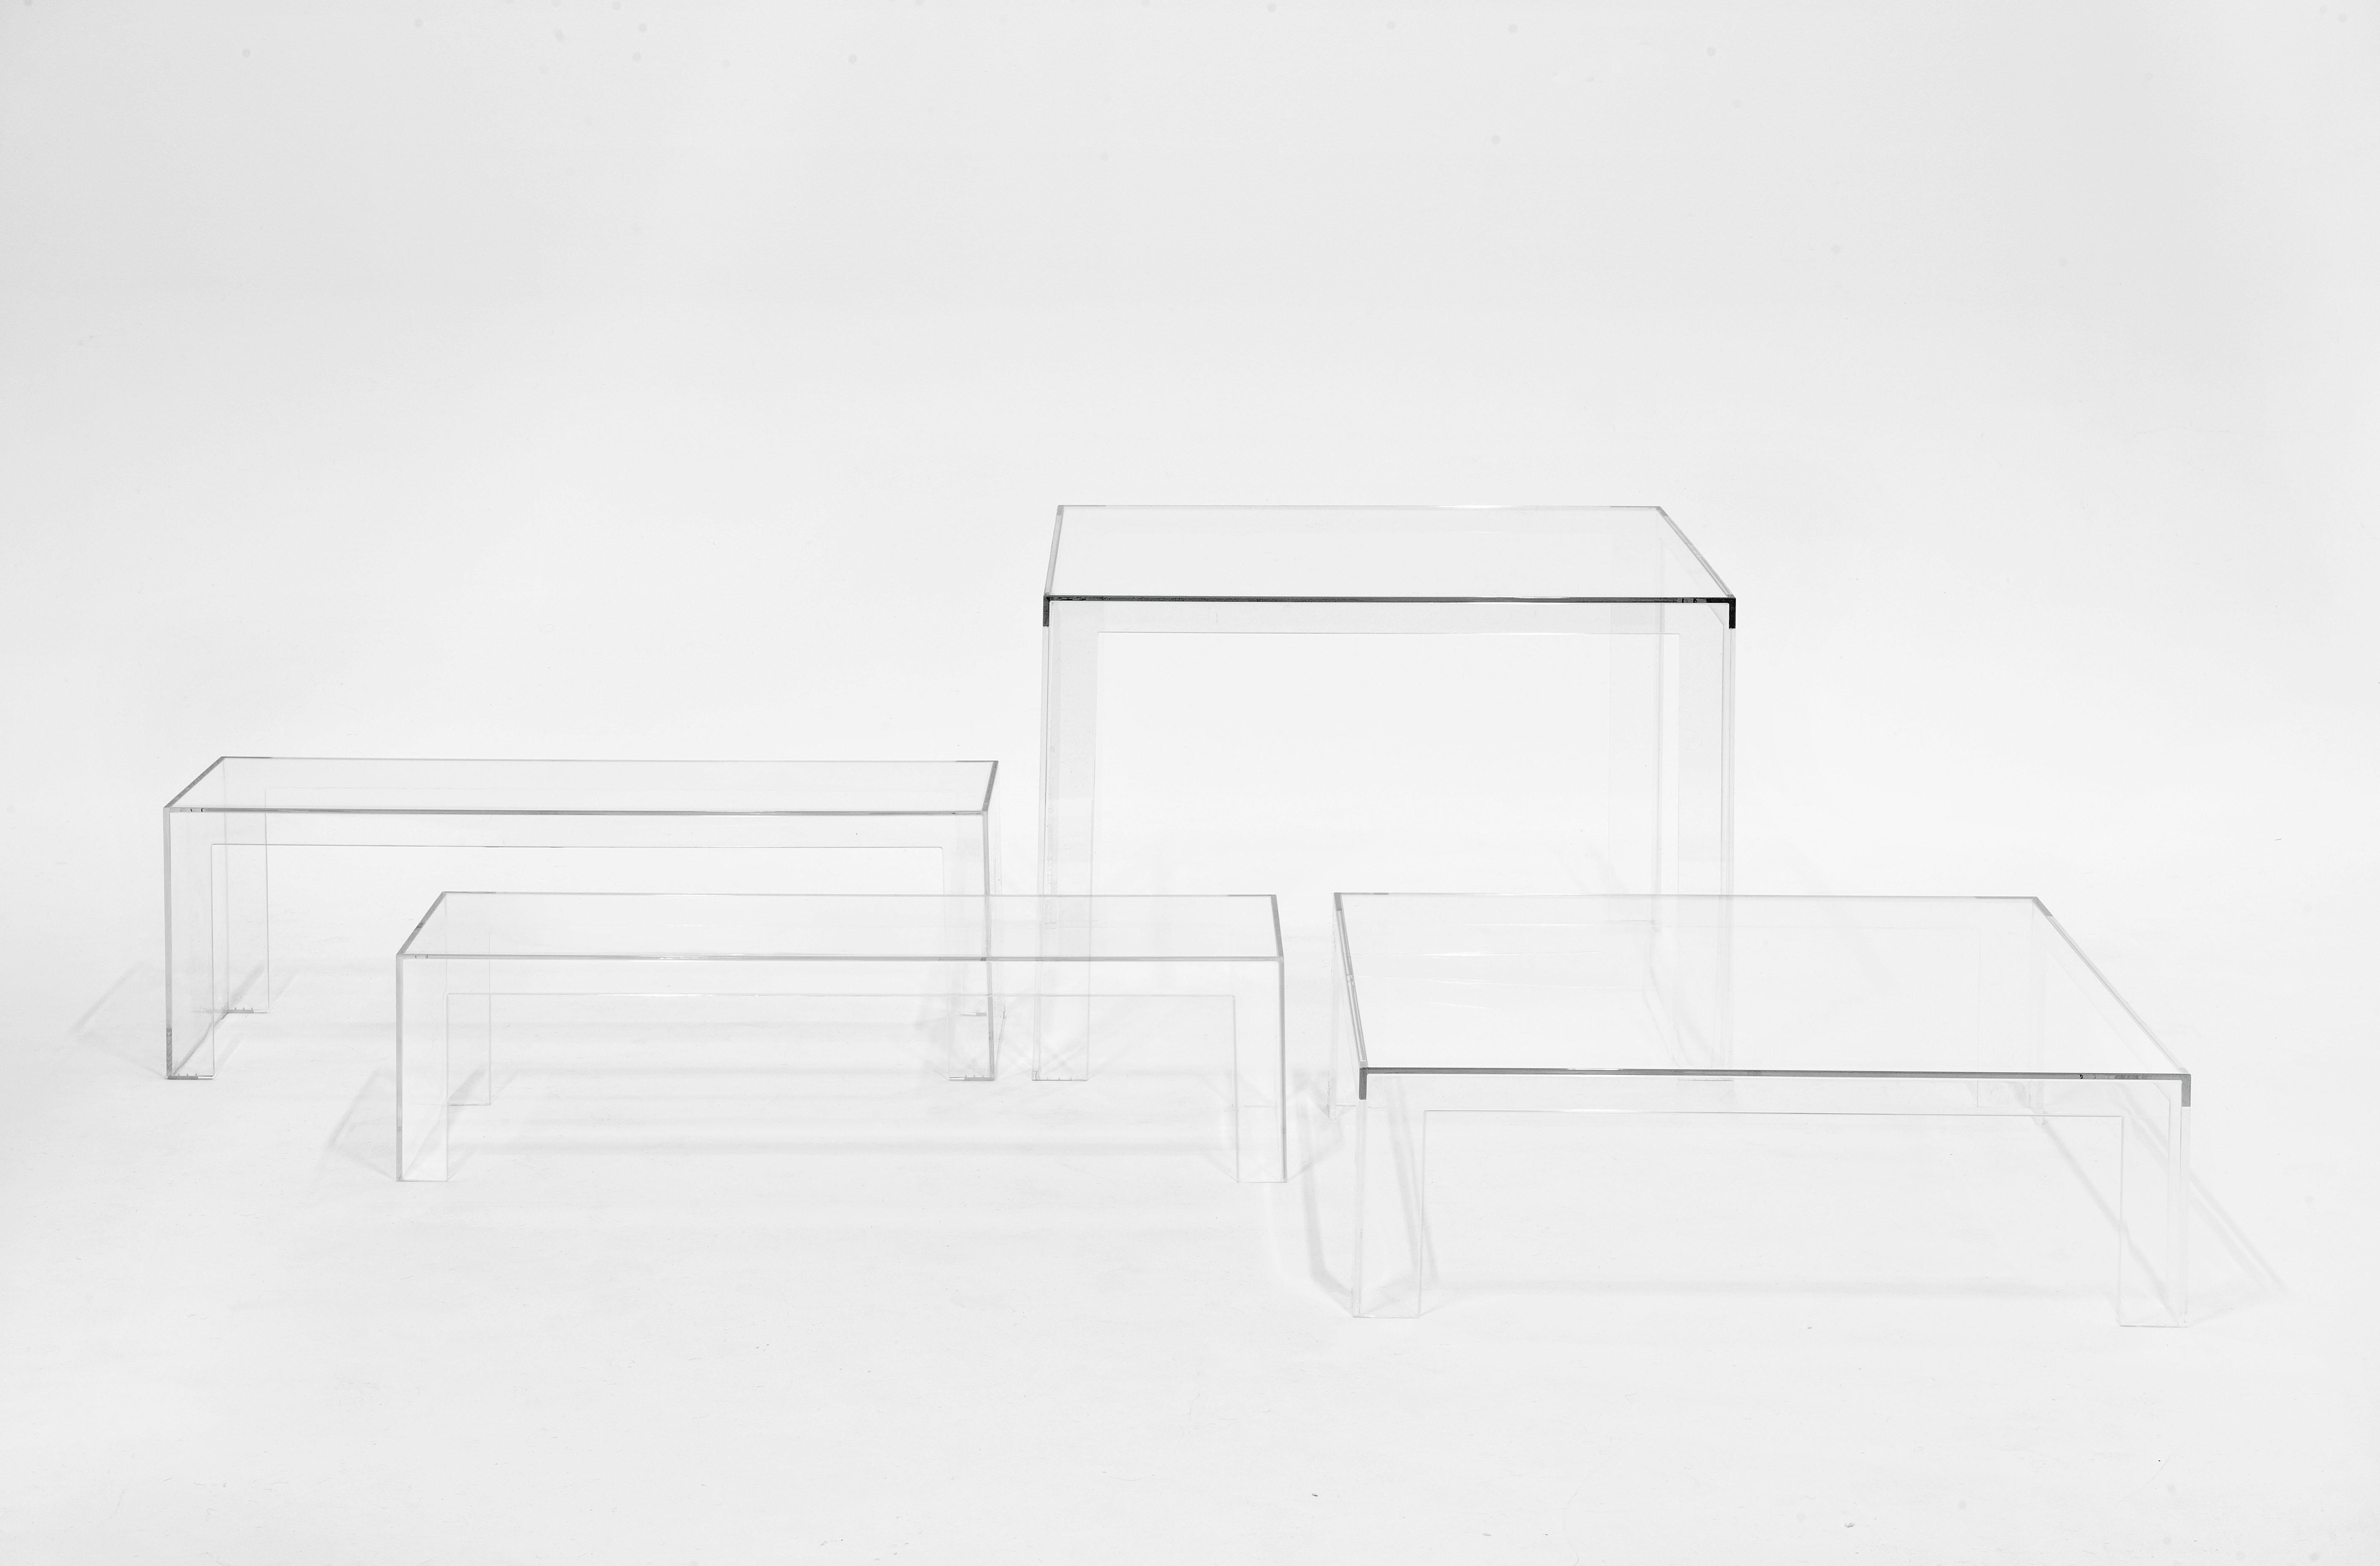 Invisible Table designed by Tokujin Yoshioka combines lightness and solidity, grace and elegance and practicality and style. Its simplicity and purity of form makes it adaptable to any environment. Its sophisticated palette of colours ranging from